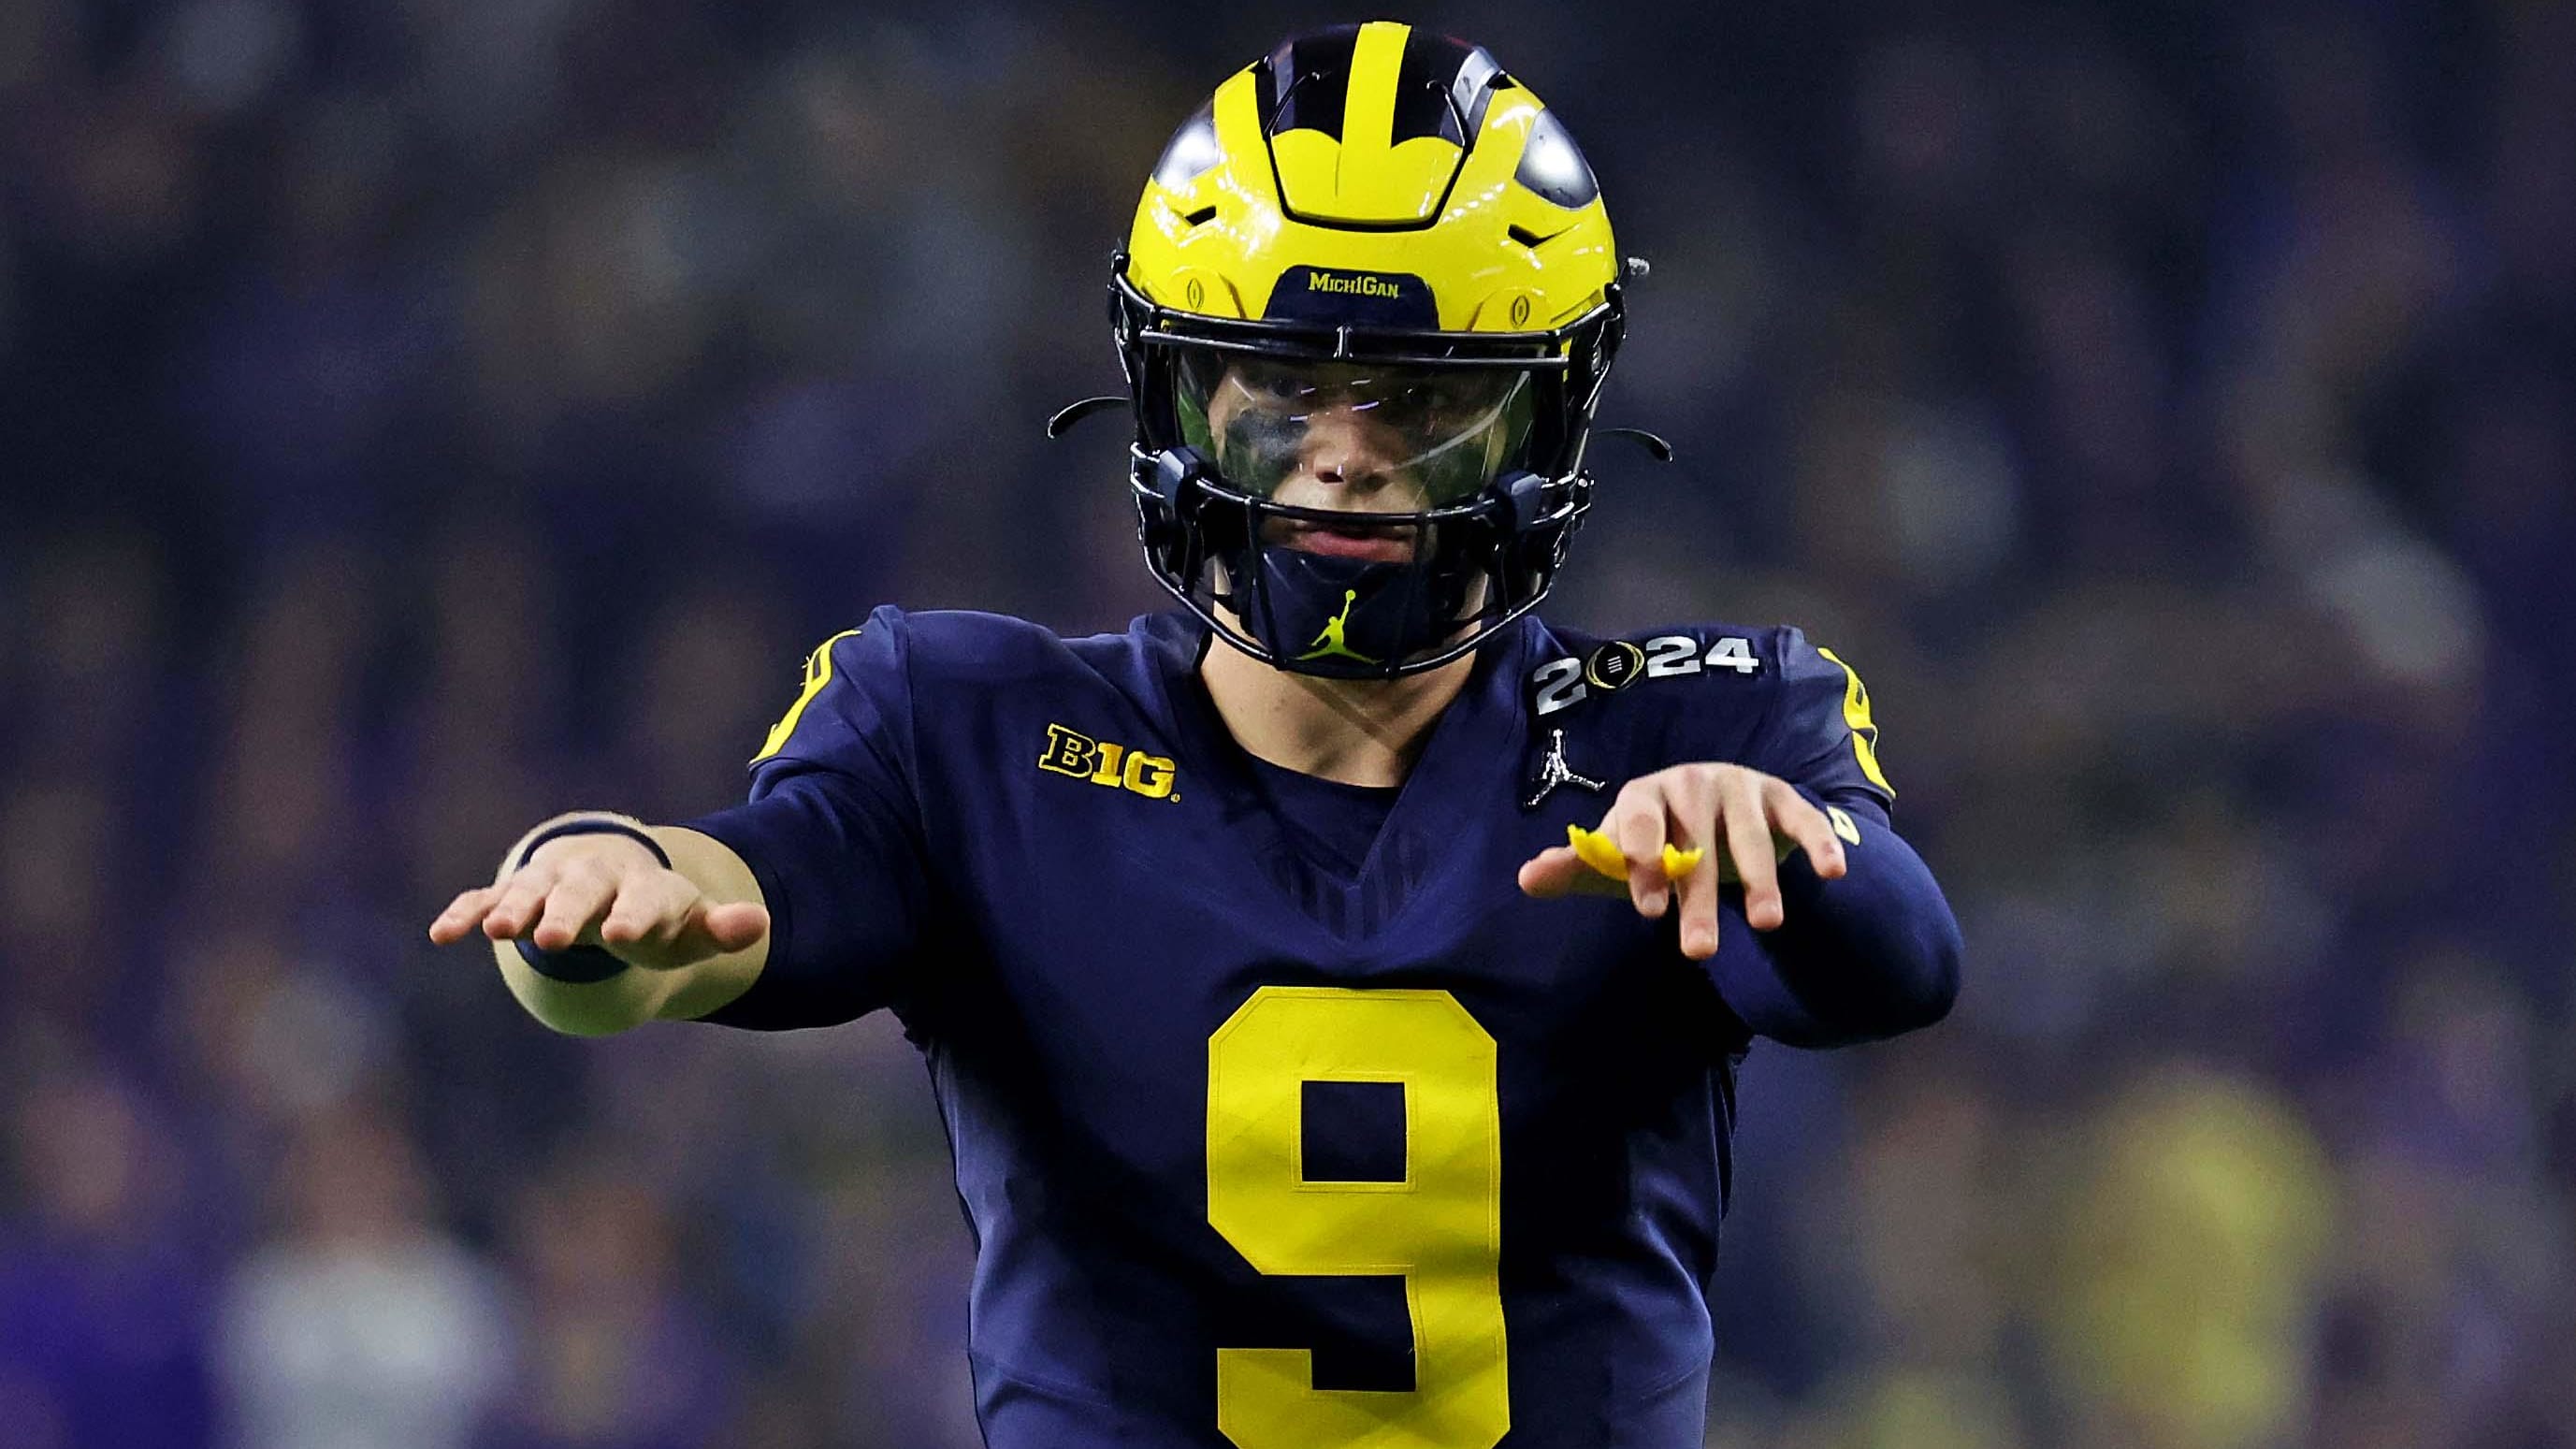 2024 NFL Draft: Examining the Impact of College Experience on Top QB Prospects